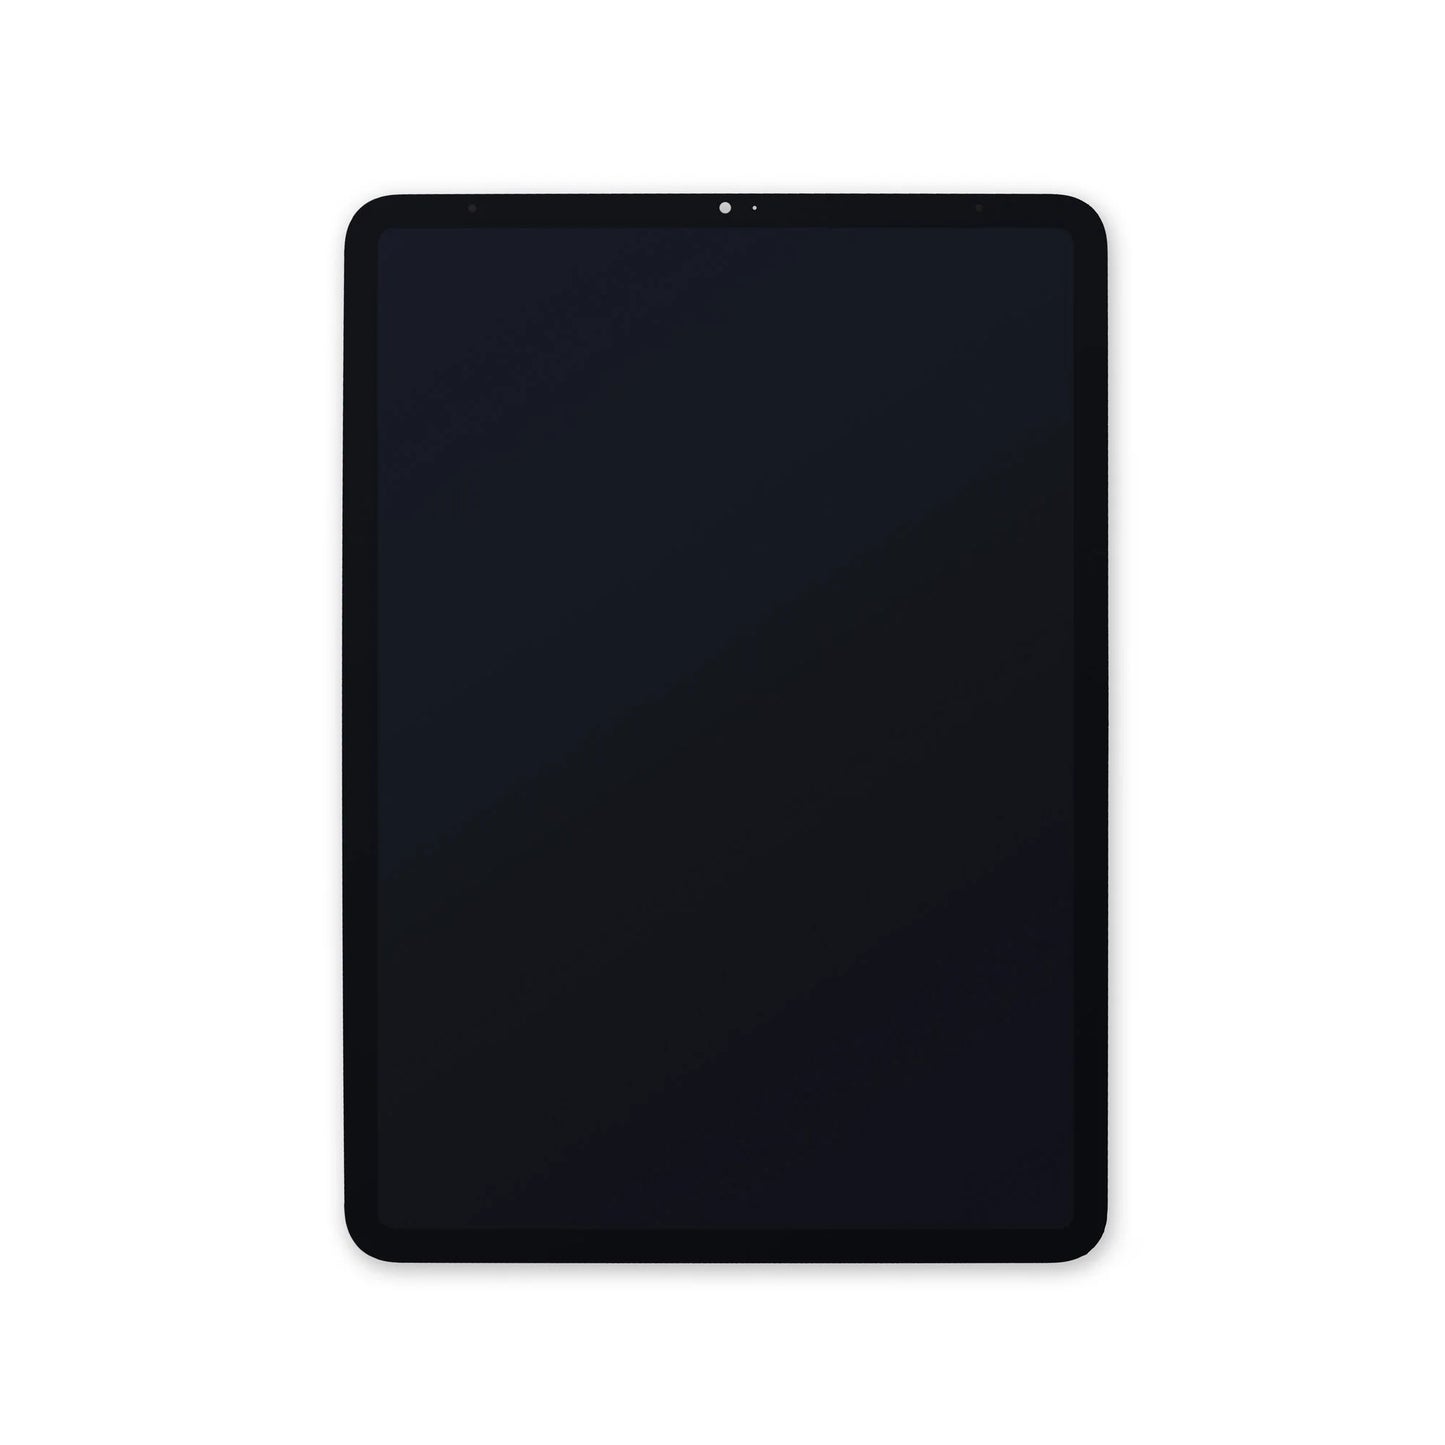 iPad Pro 11" 1st & 2nd Generation LCD Display Touch Screen Digitizer Assembly